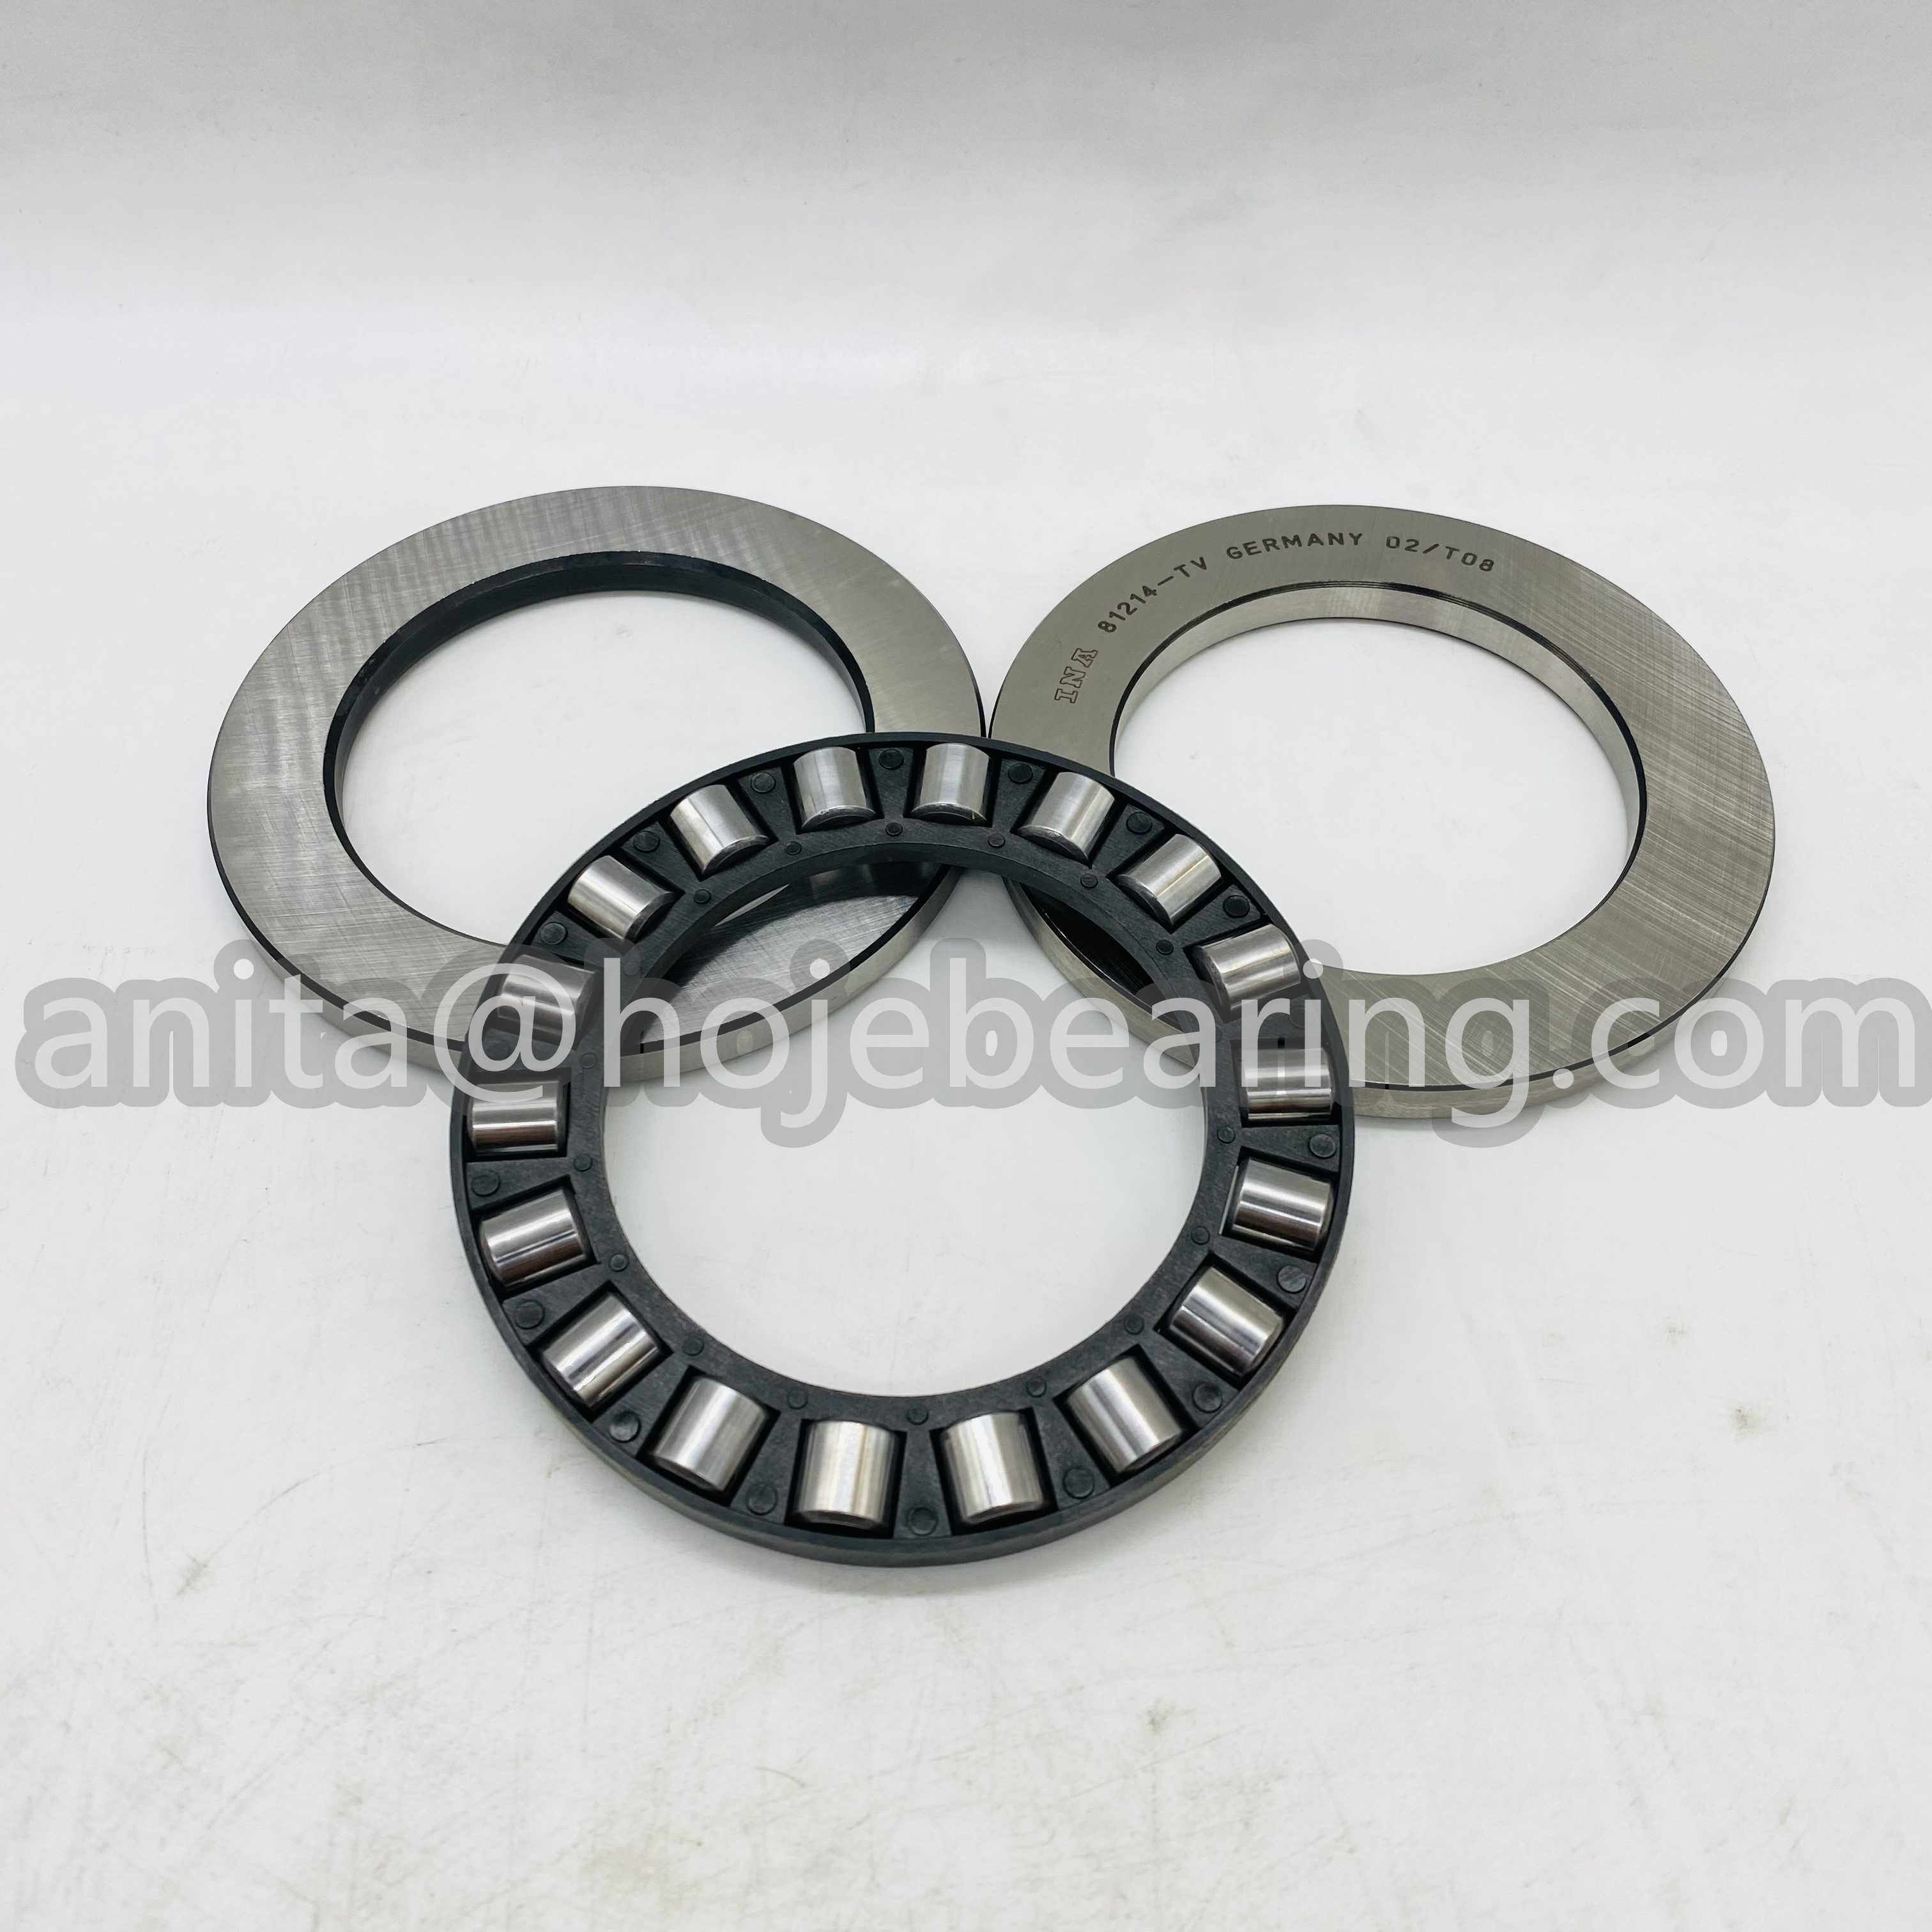 81214-TV INA -Axial cylindrical roller bearing Axial cylindrical roller bearings 812, single direction, comprising K812, GS, WS